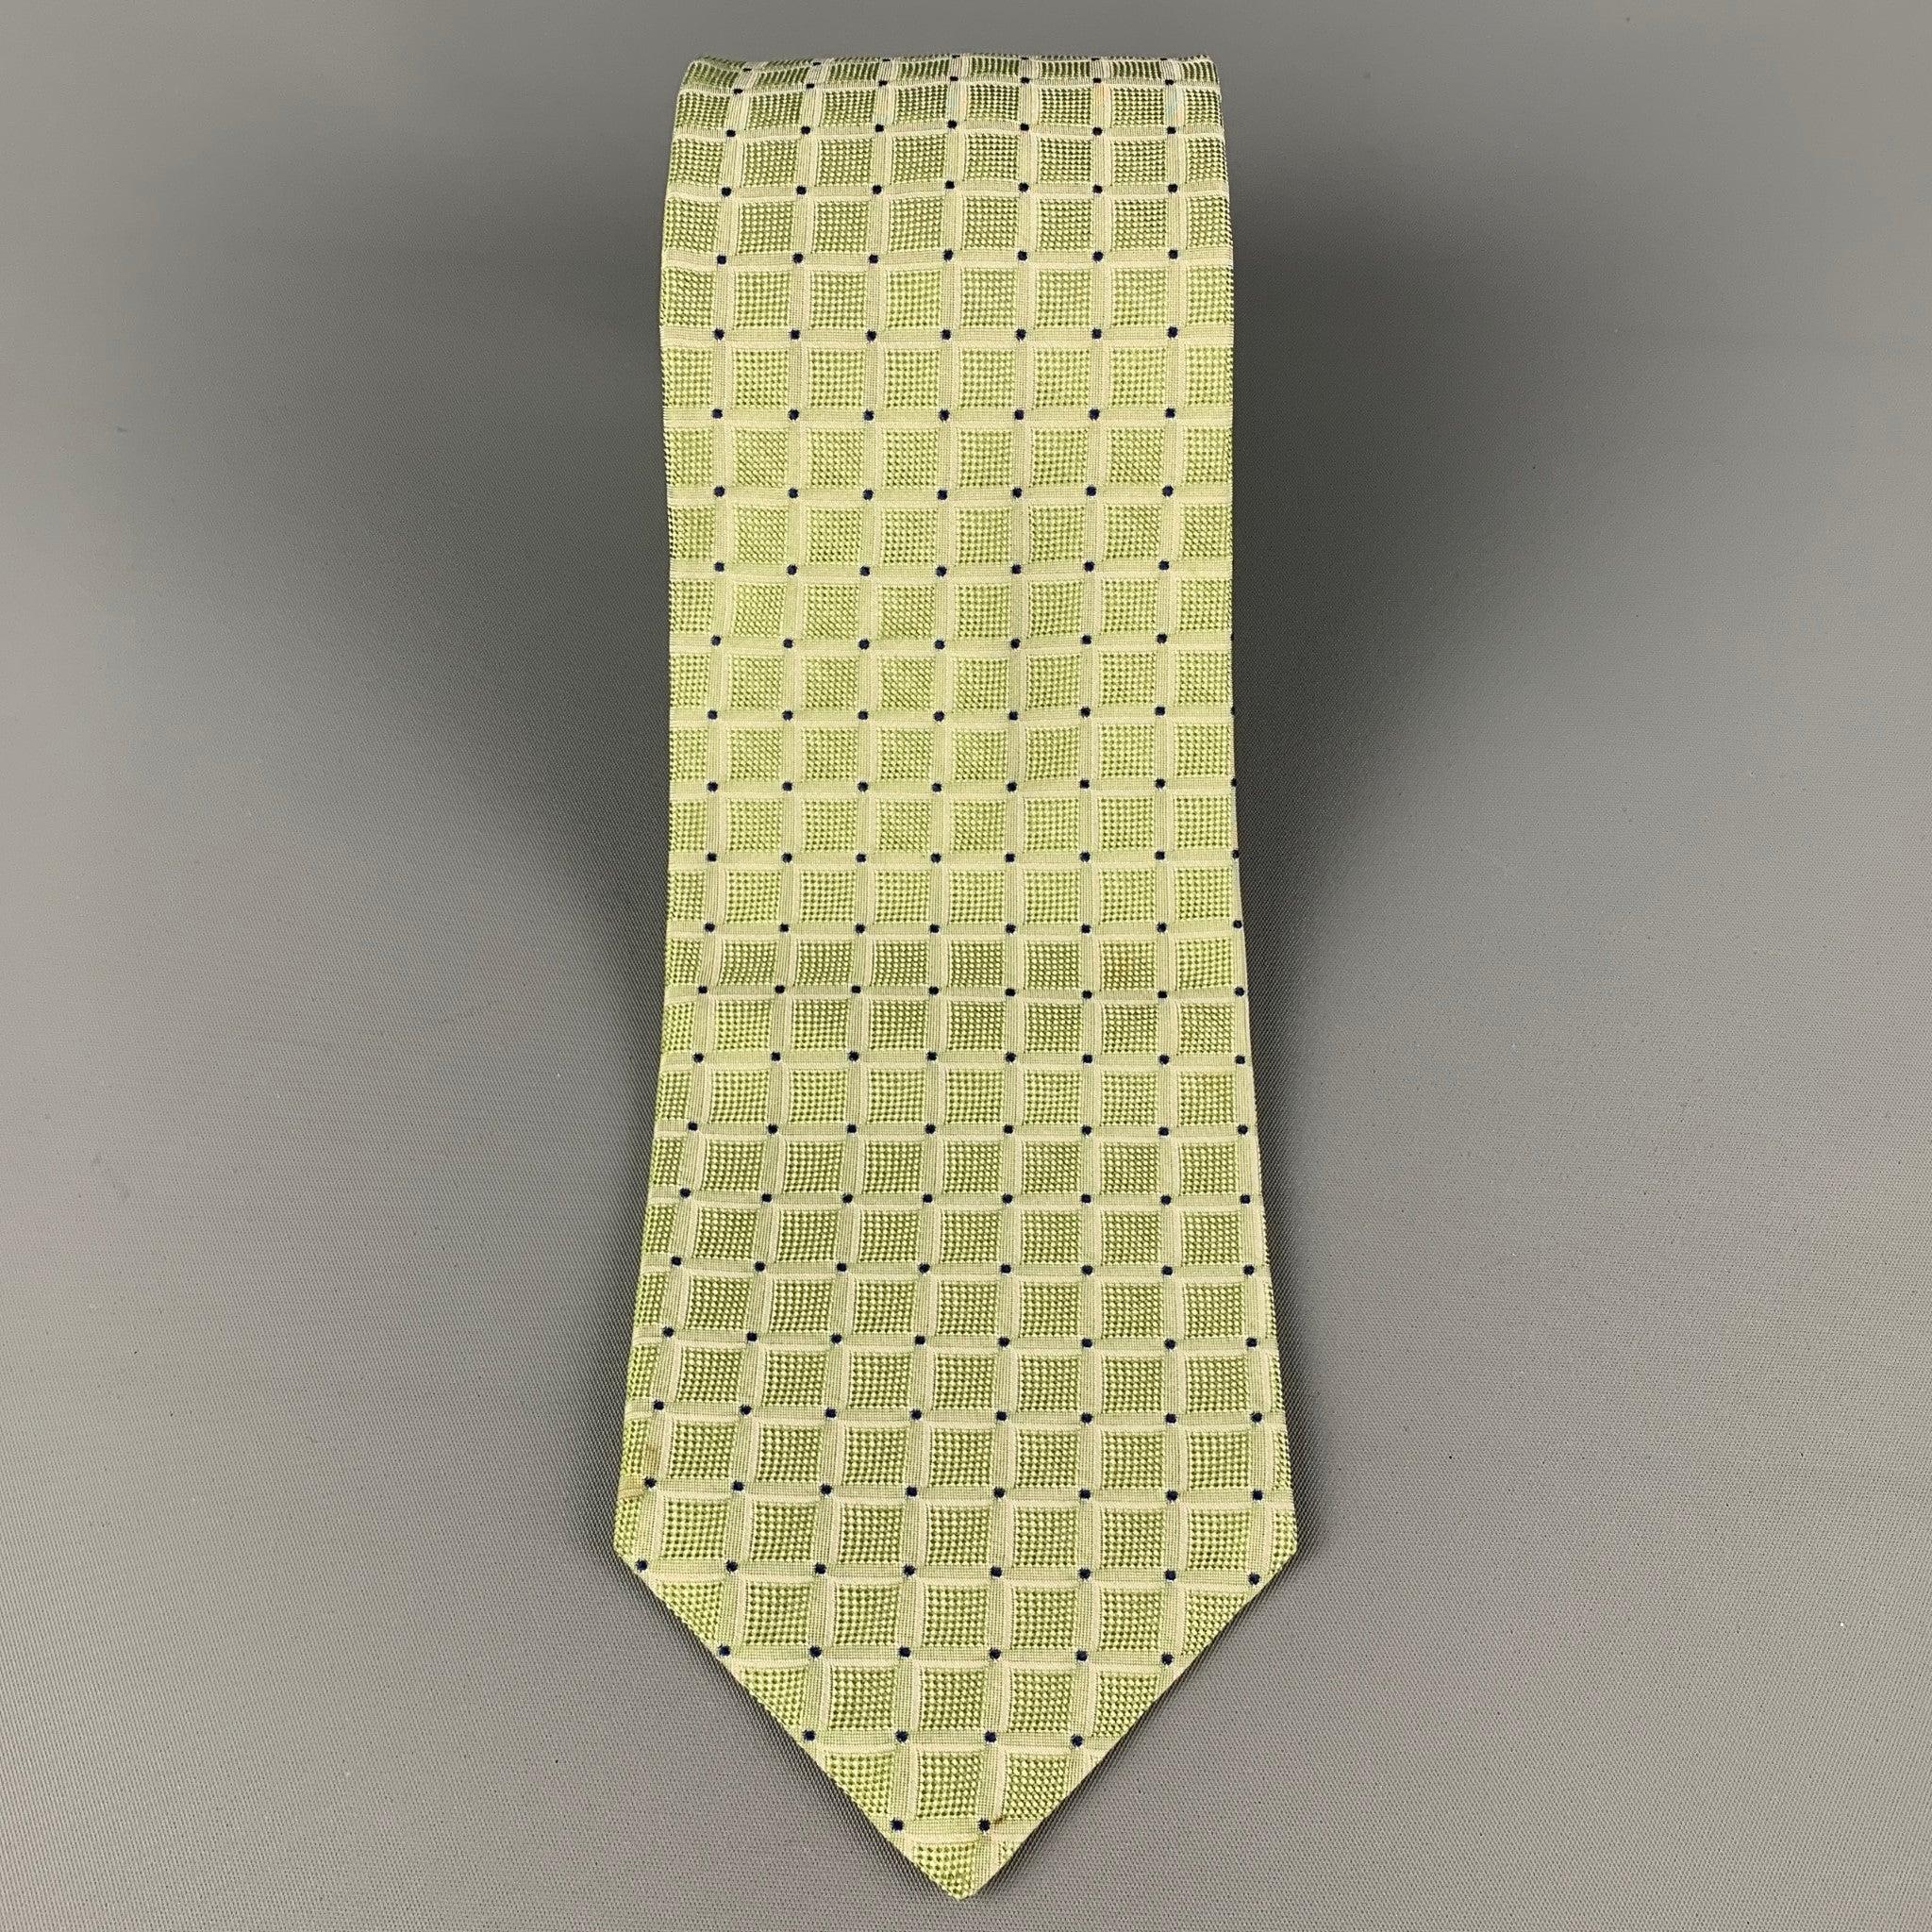 KITON necktie comes in a sage silk with a all over square print. Made in Italy. Very Good Pre-Owned Condition.Width: 3.75 inches  Length: 58 inches 

  
  
 
Reference: 120389
Category: Tie
More Details
    
Brand:  KITON
Gender:  Male
Color: 